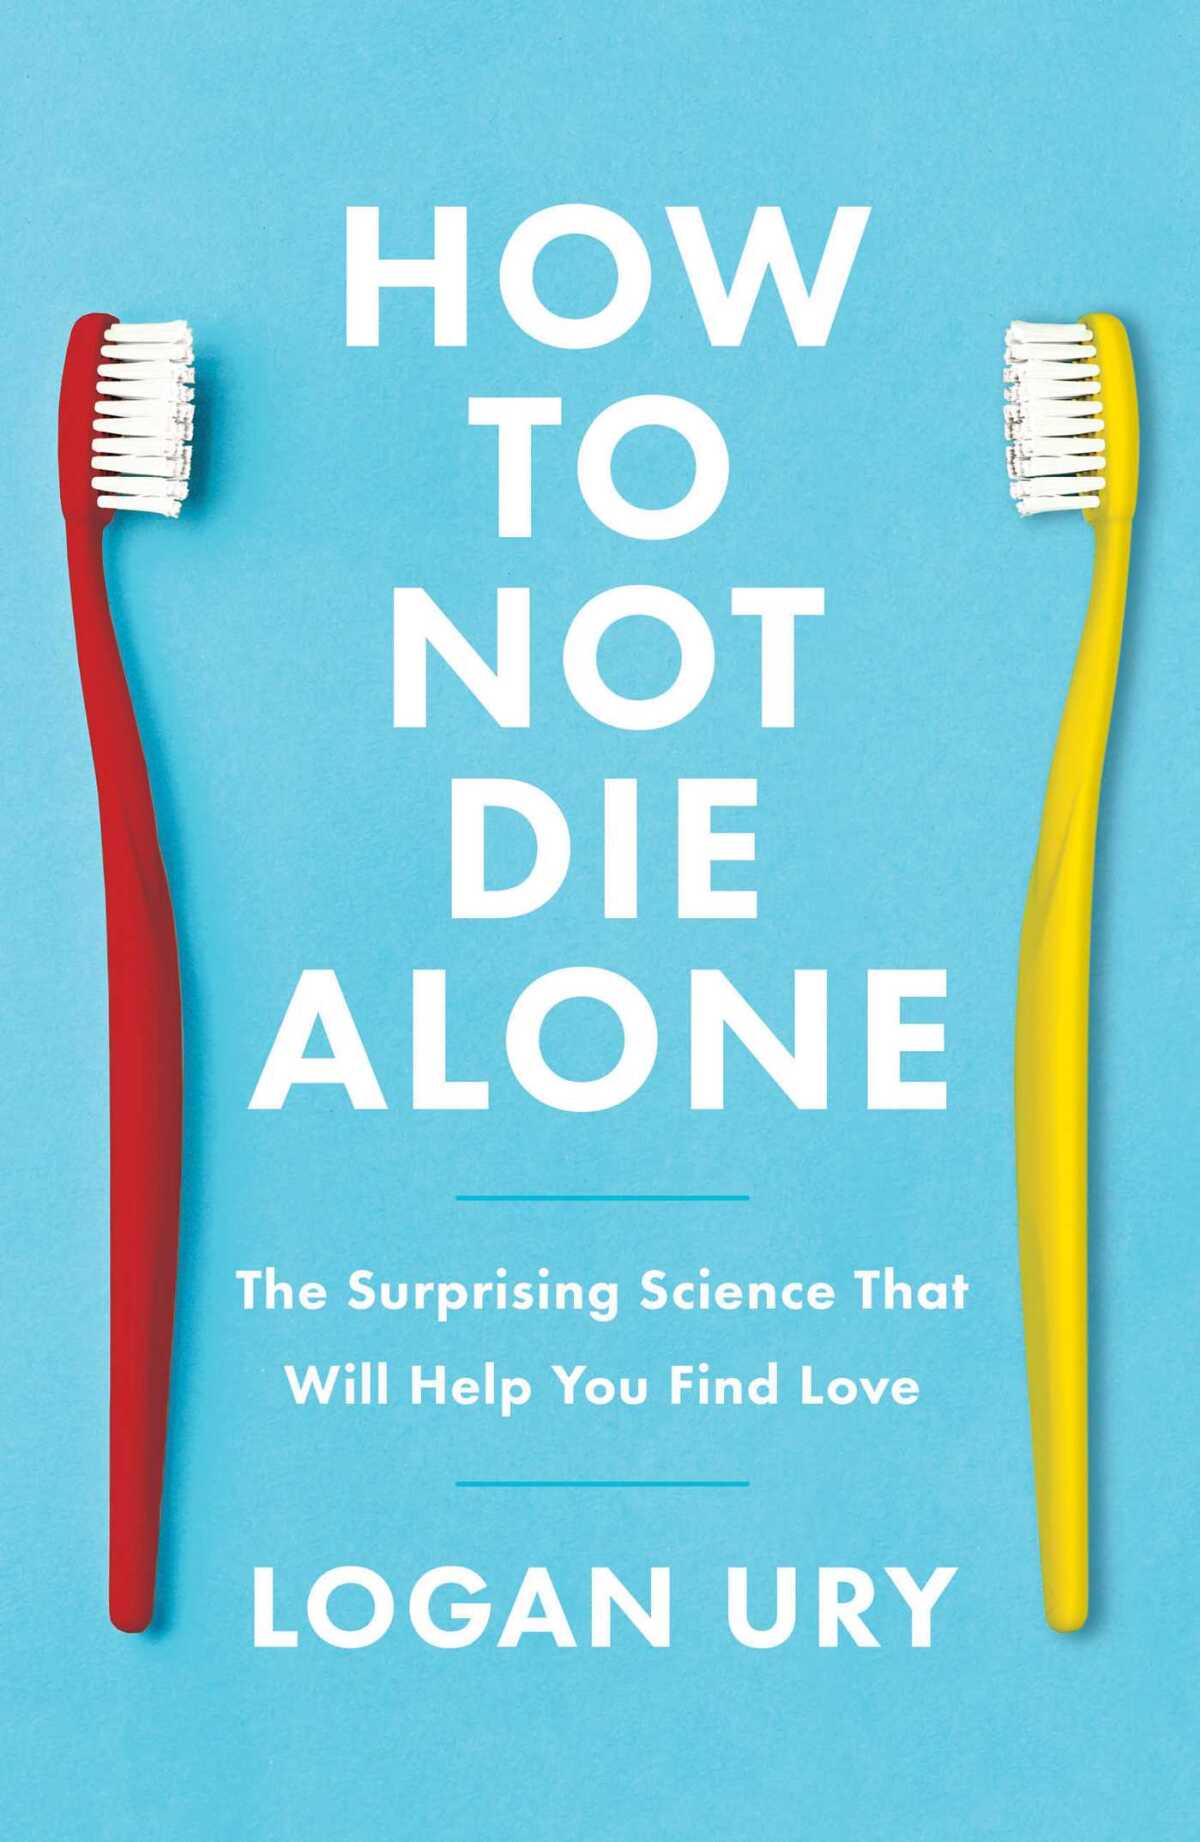 "How to Not Die Alone" by Logan Ury explores the science of how to find love.